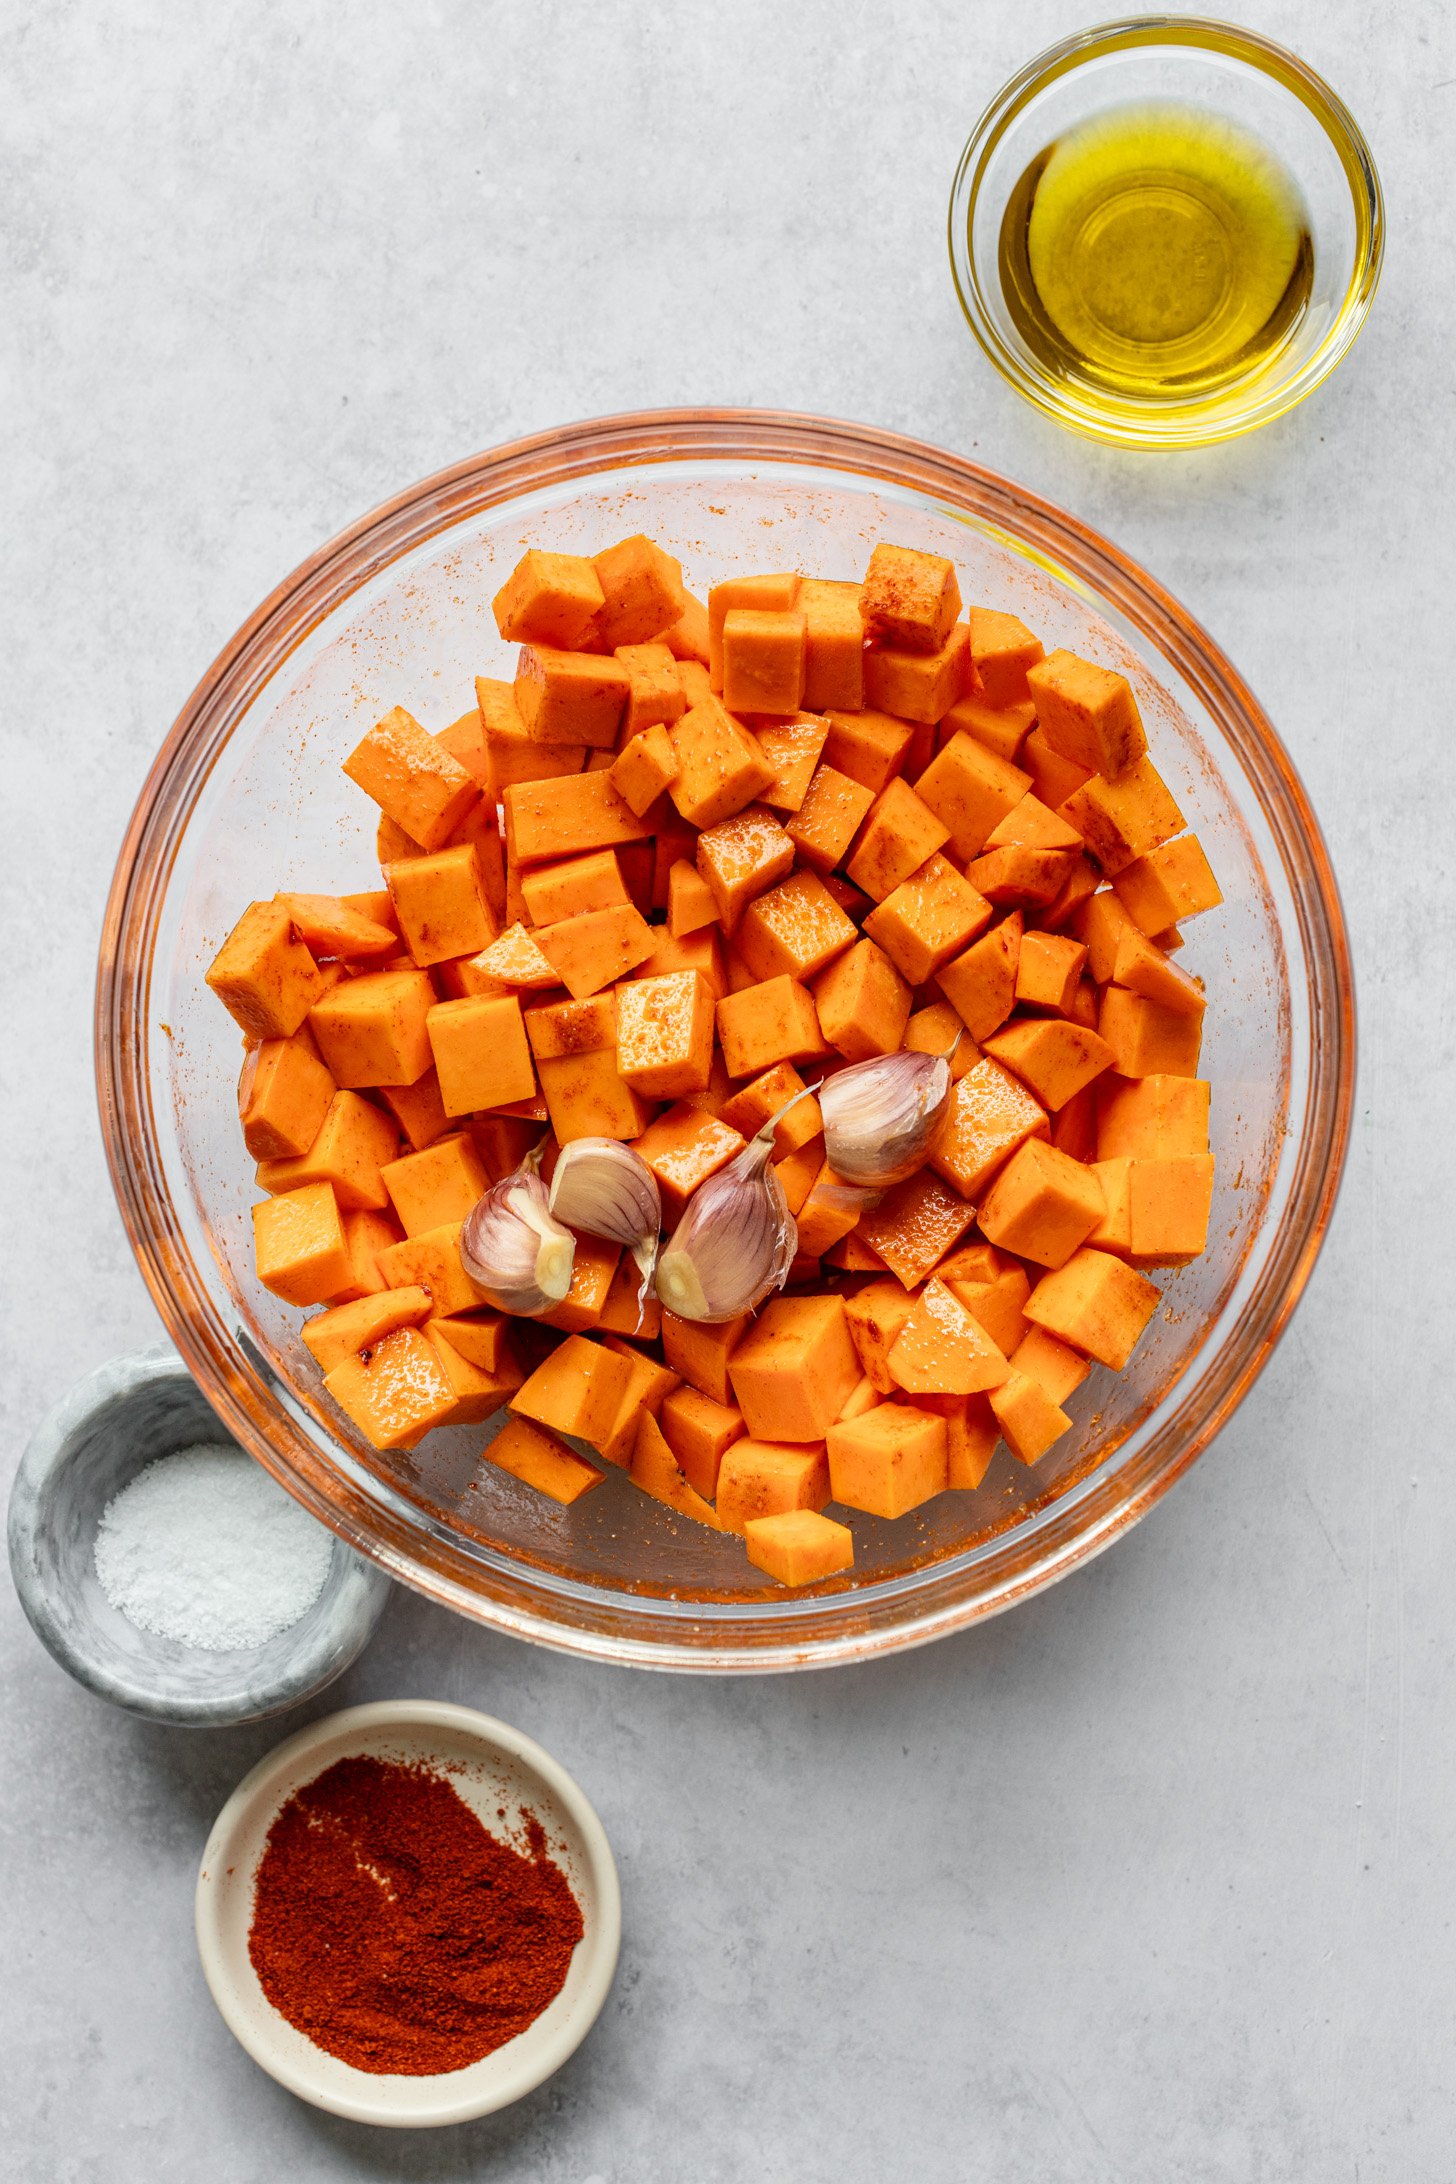 A bowl of diced sweet potato and whole garlic cloves on a grey table There are small glass bowls of olive oil, salt, and spices next to the bowl on the table.